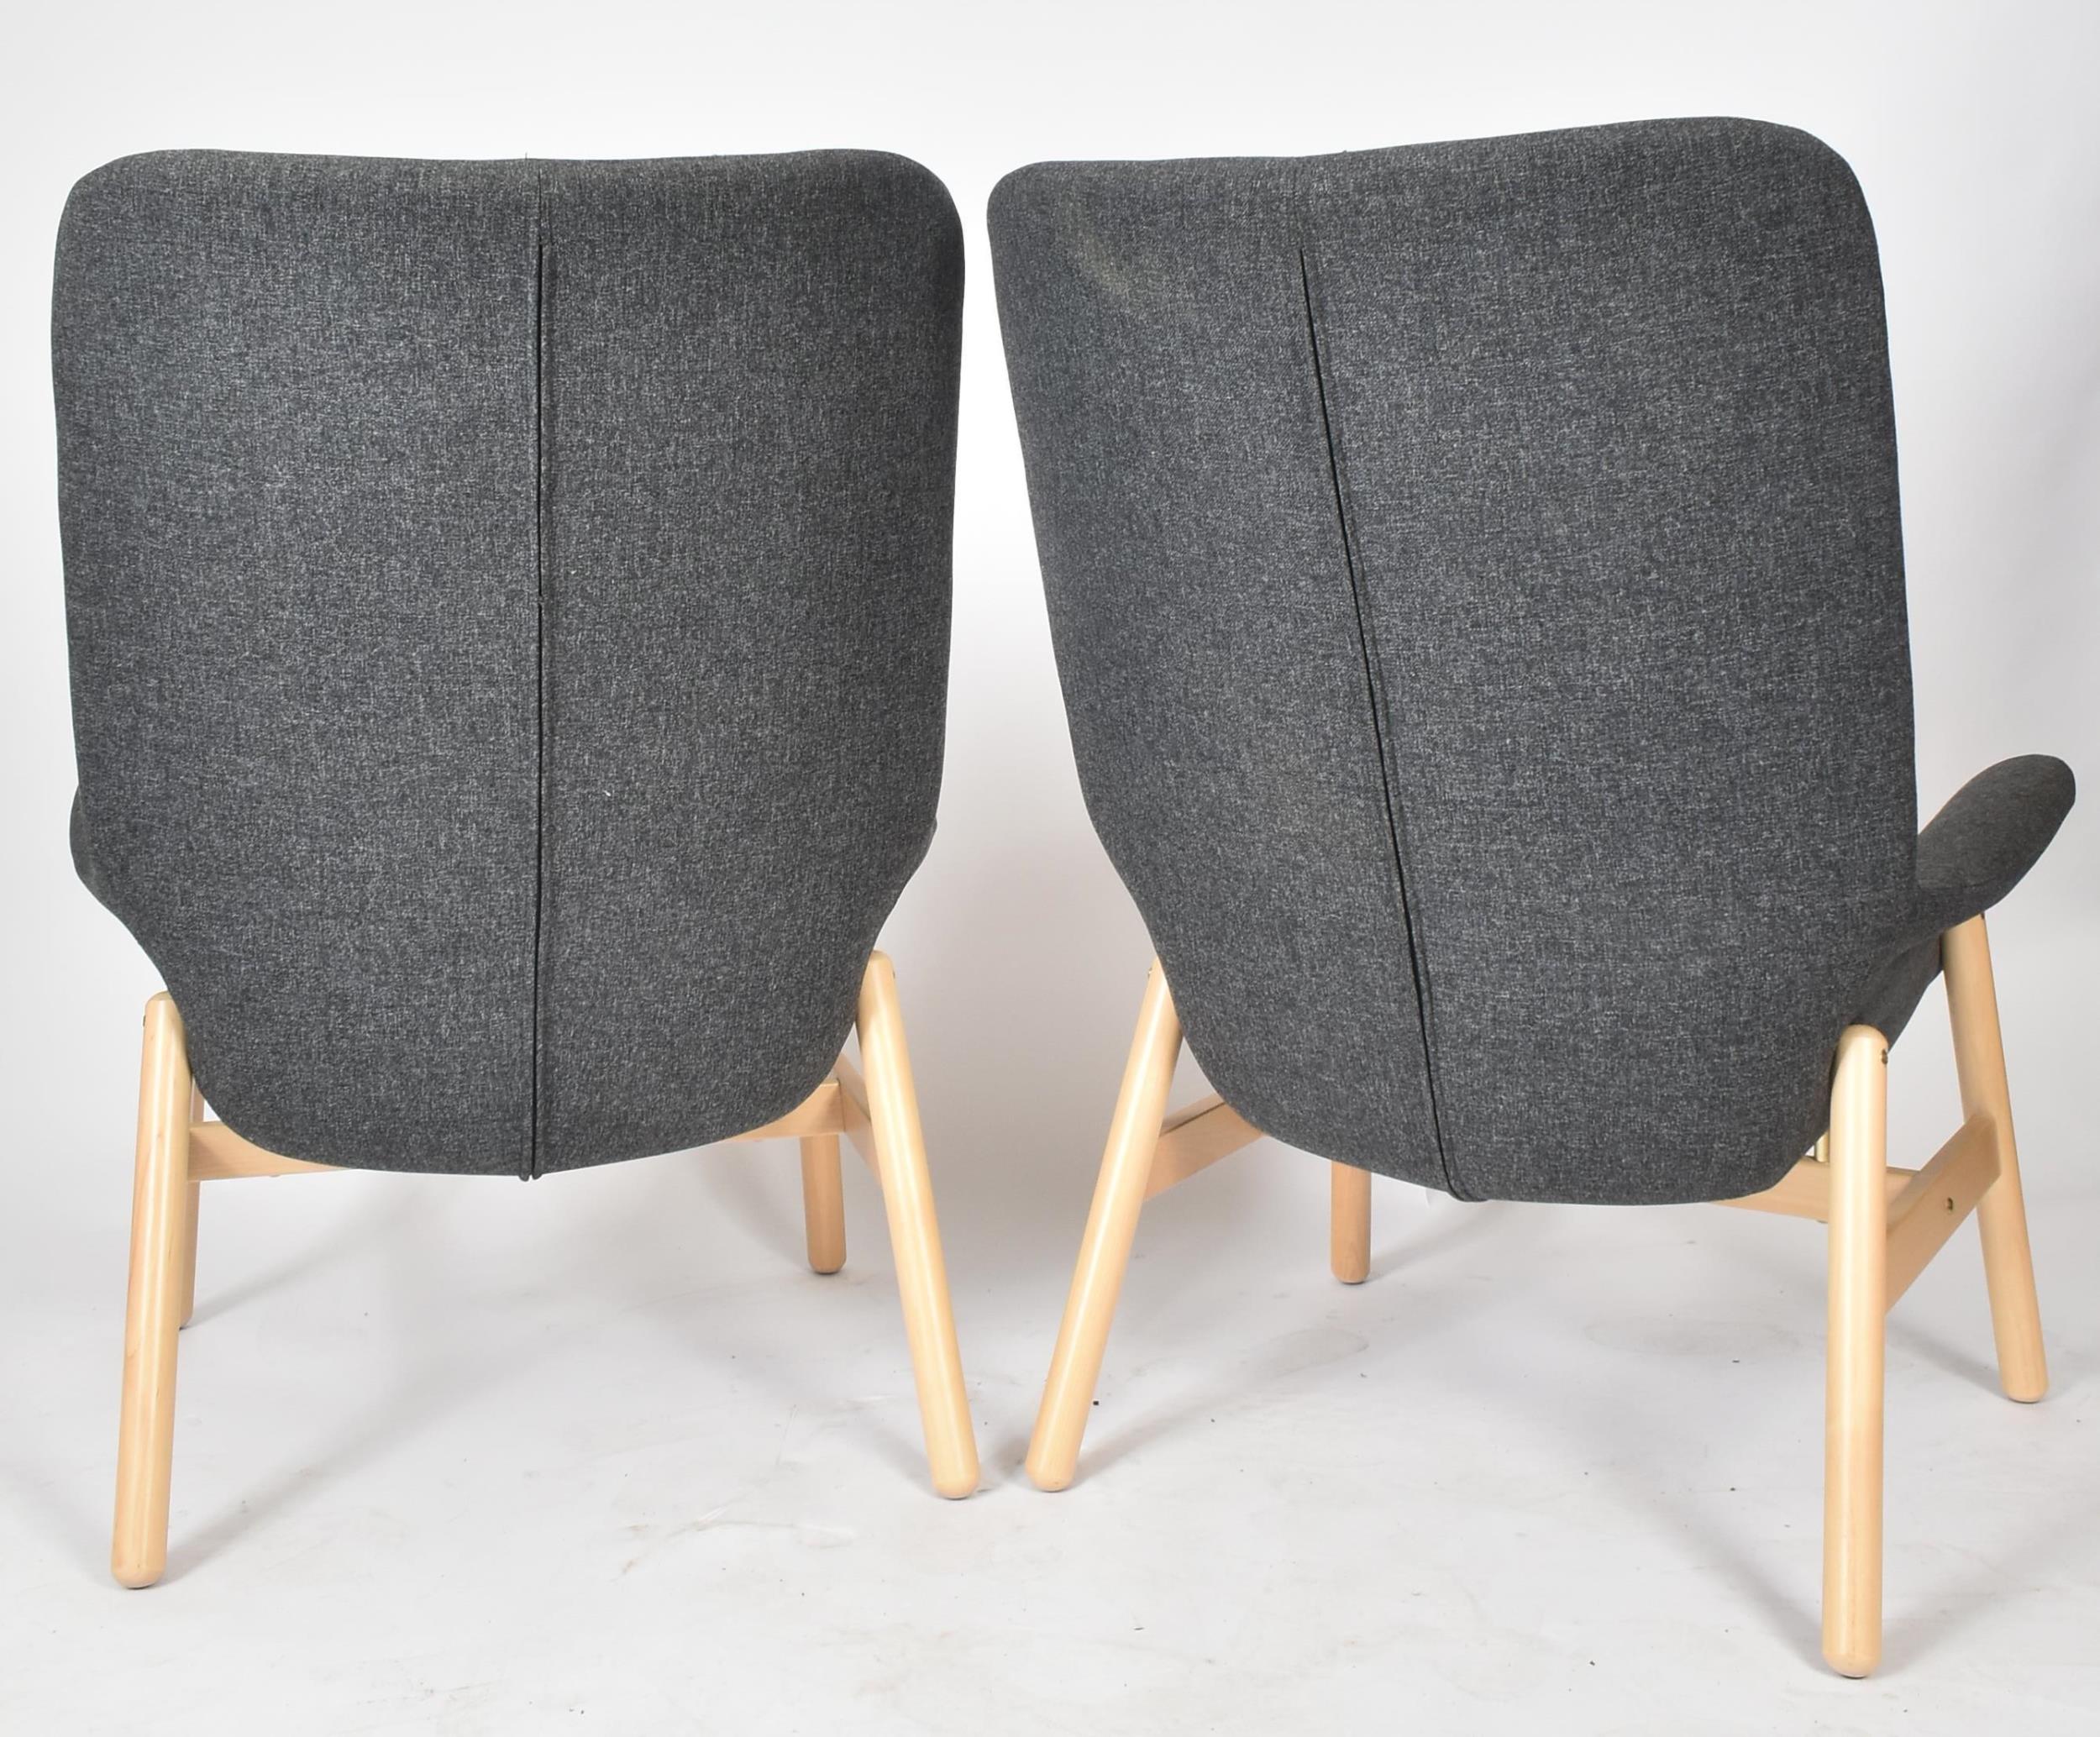 FRANCIS CAYOUETTE X IKEA - VEDBO - PAIR OF HIGH-BACK ARMCHAIRS - Image 5 of 5